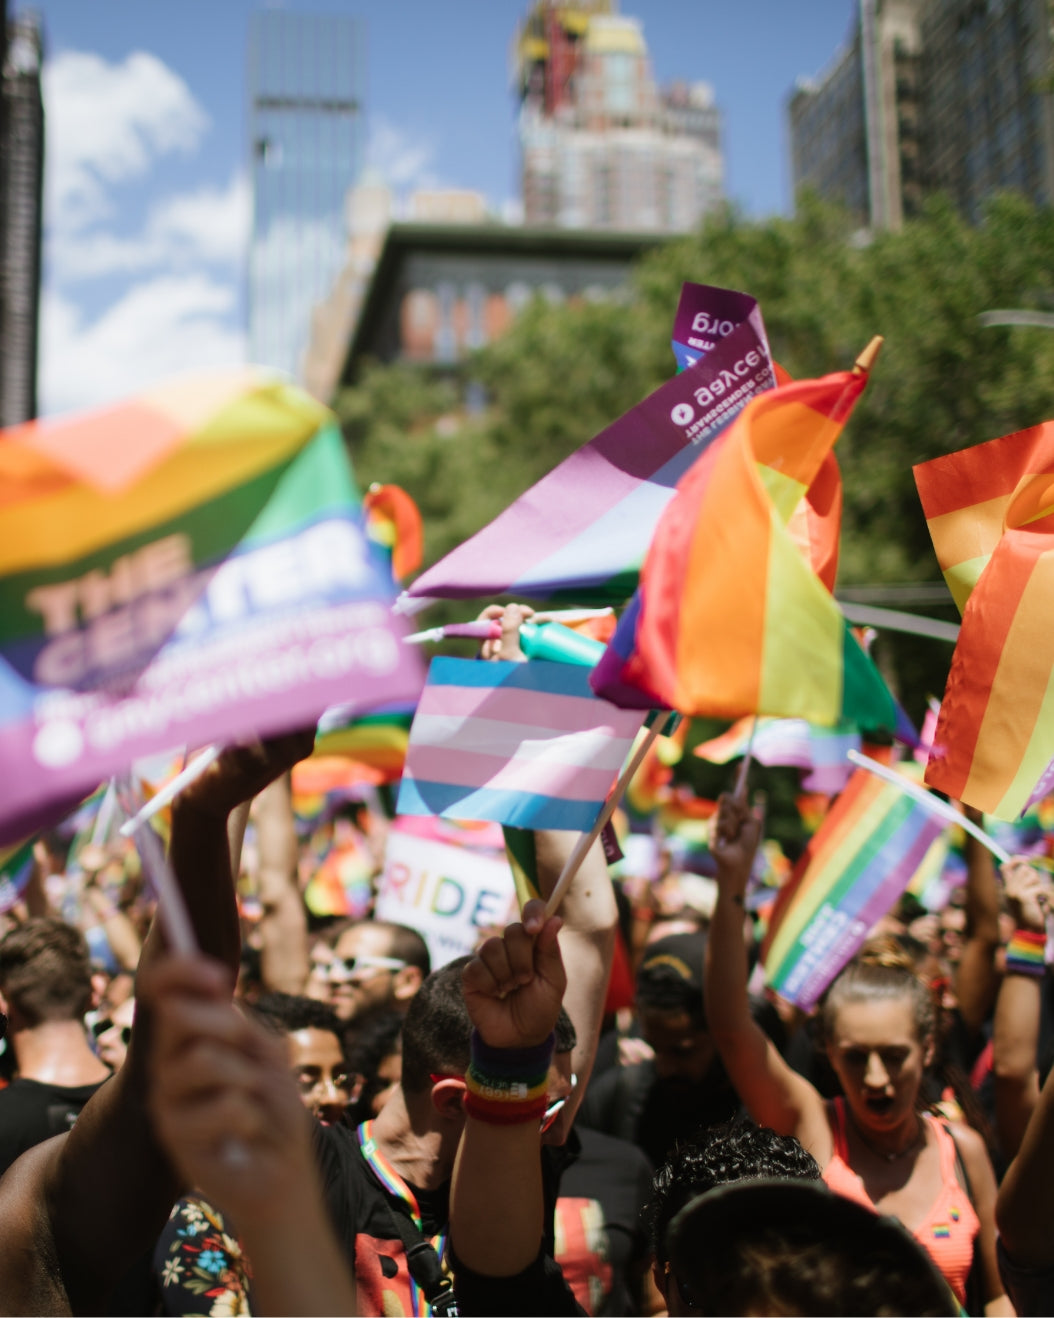 New Yorkers waving Pride flags and flags for The Center